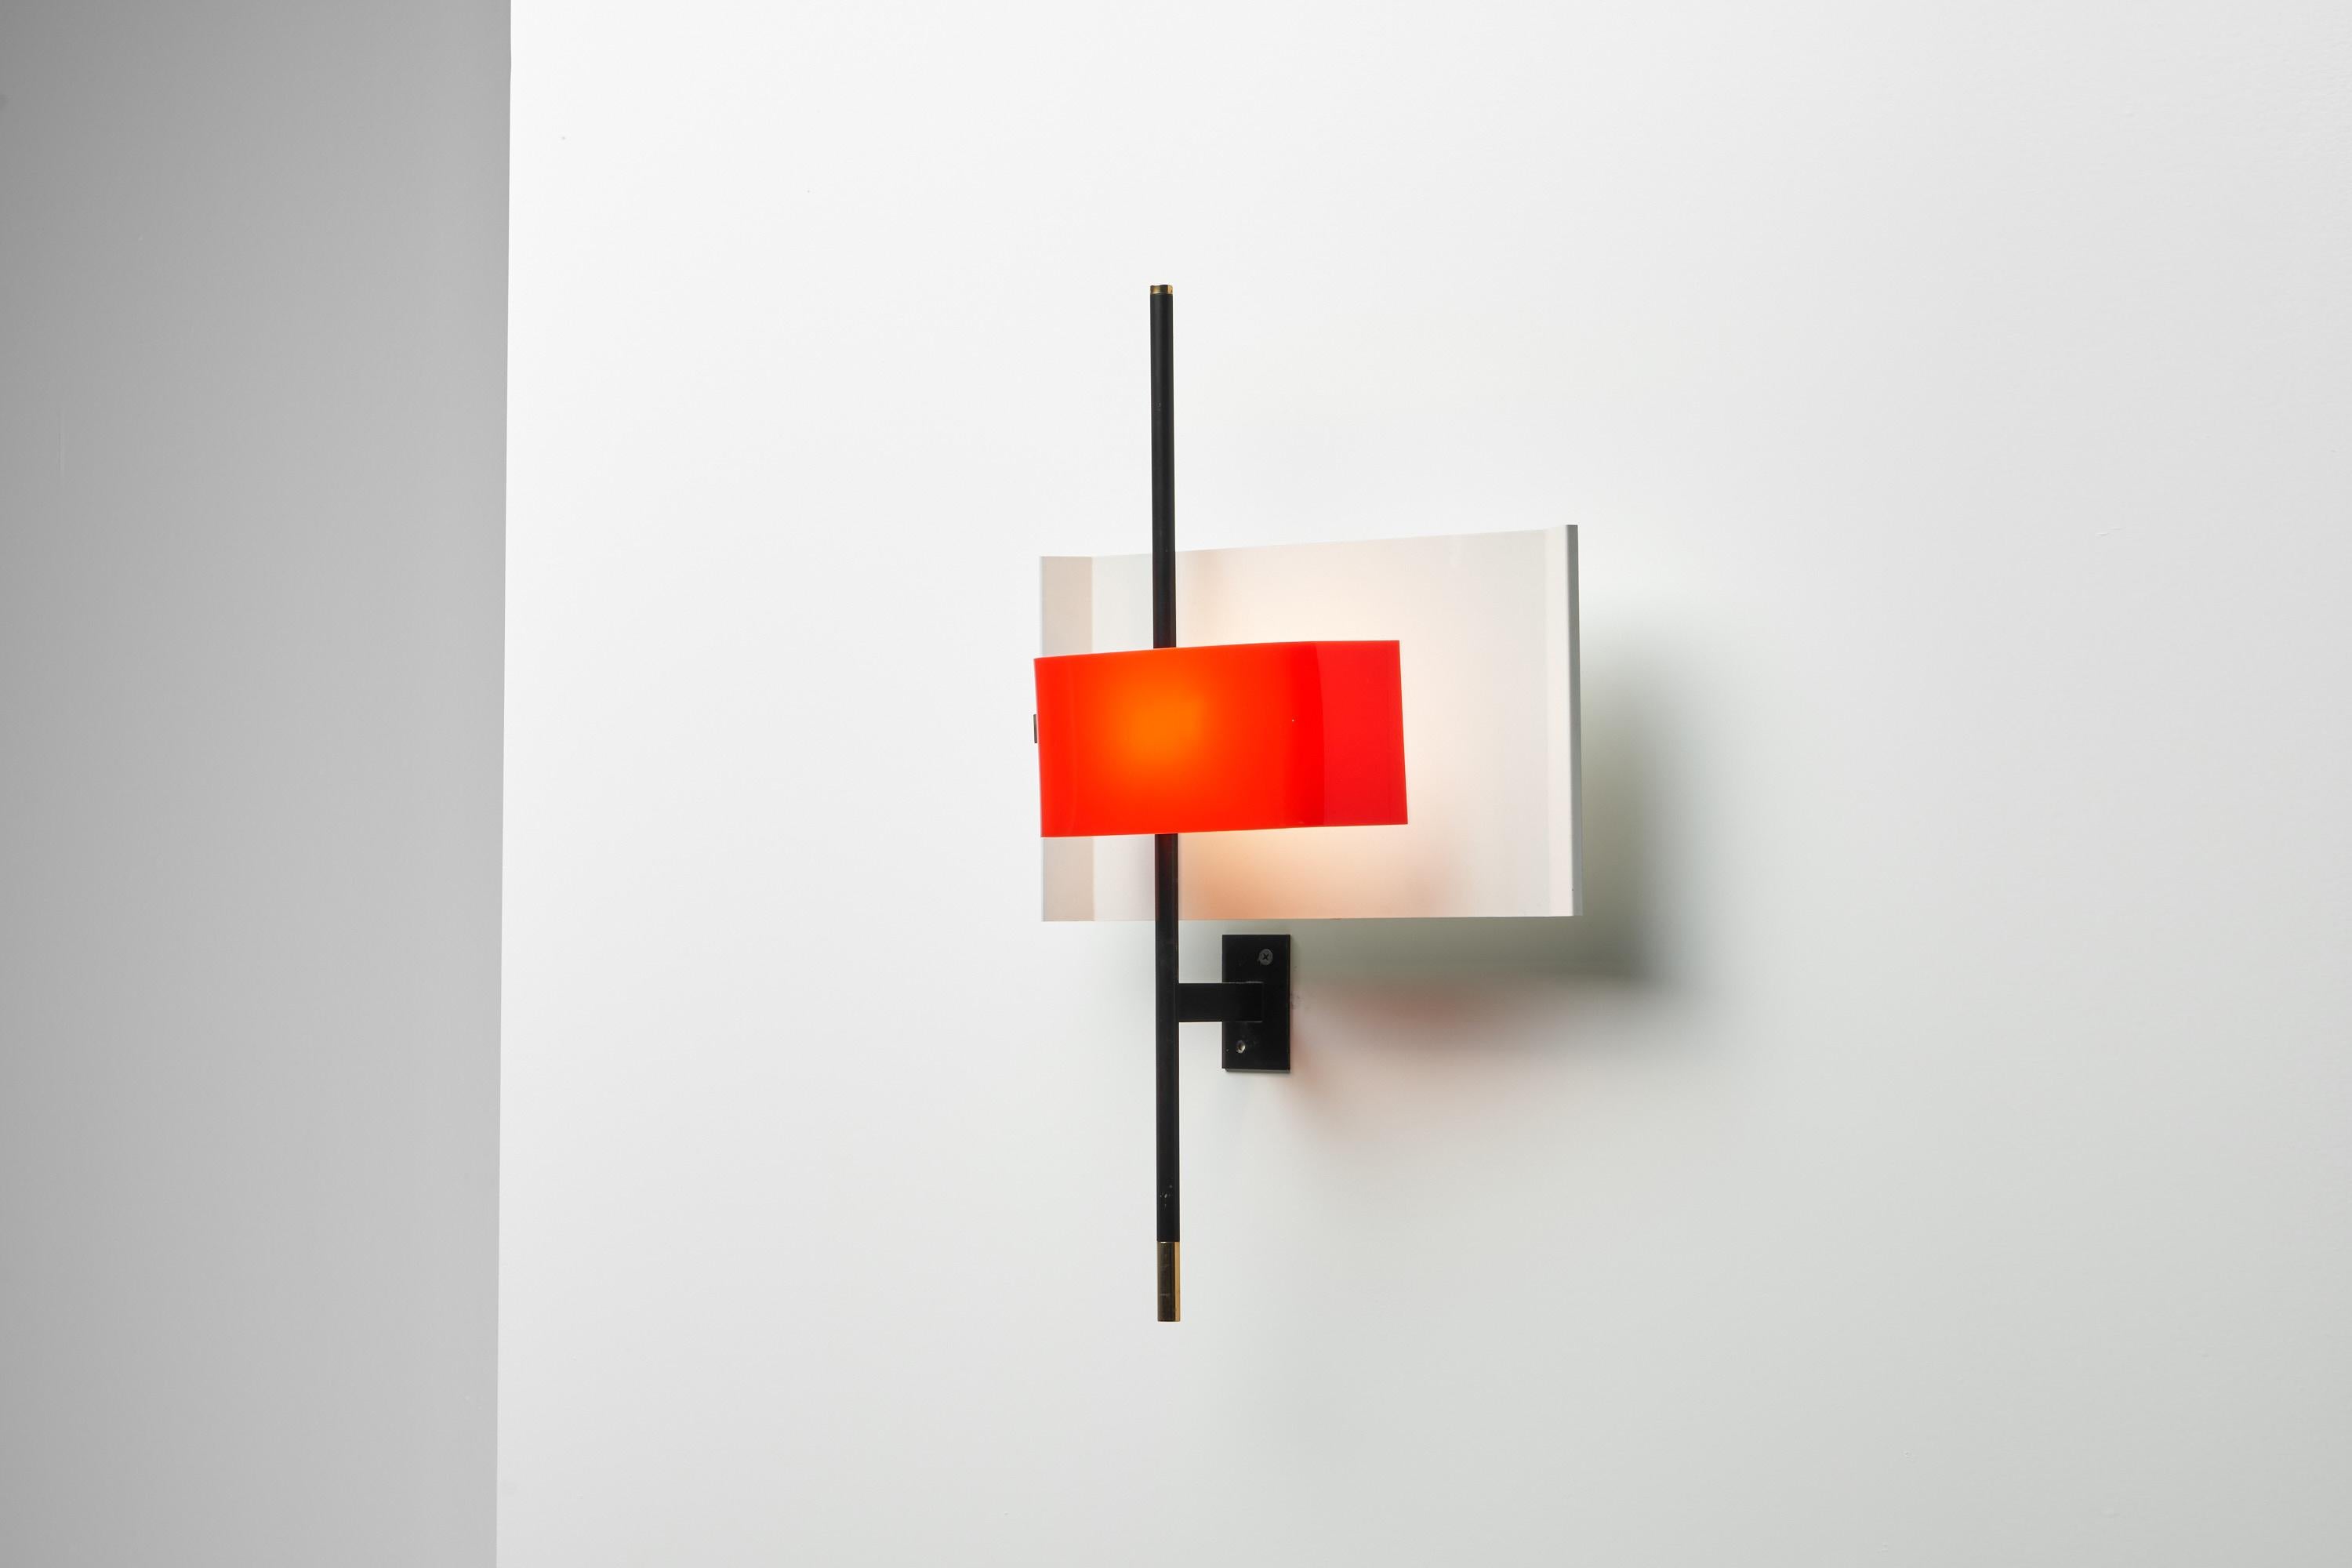 Spectacular large sized sculptural wall lamp model 2020 designed by Bruno Gatta and manufactured by Stilnovo, Italy 1955. This is for a very nice minimalist wall lamp with black lacquered arm, a white lacquered shade, a red plexiglass diffuser and